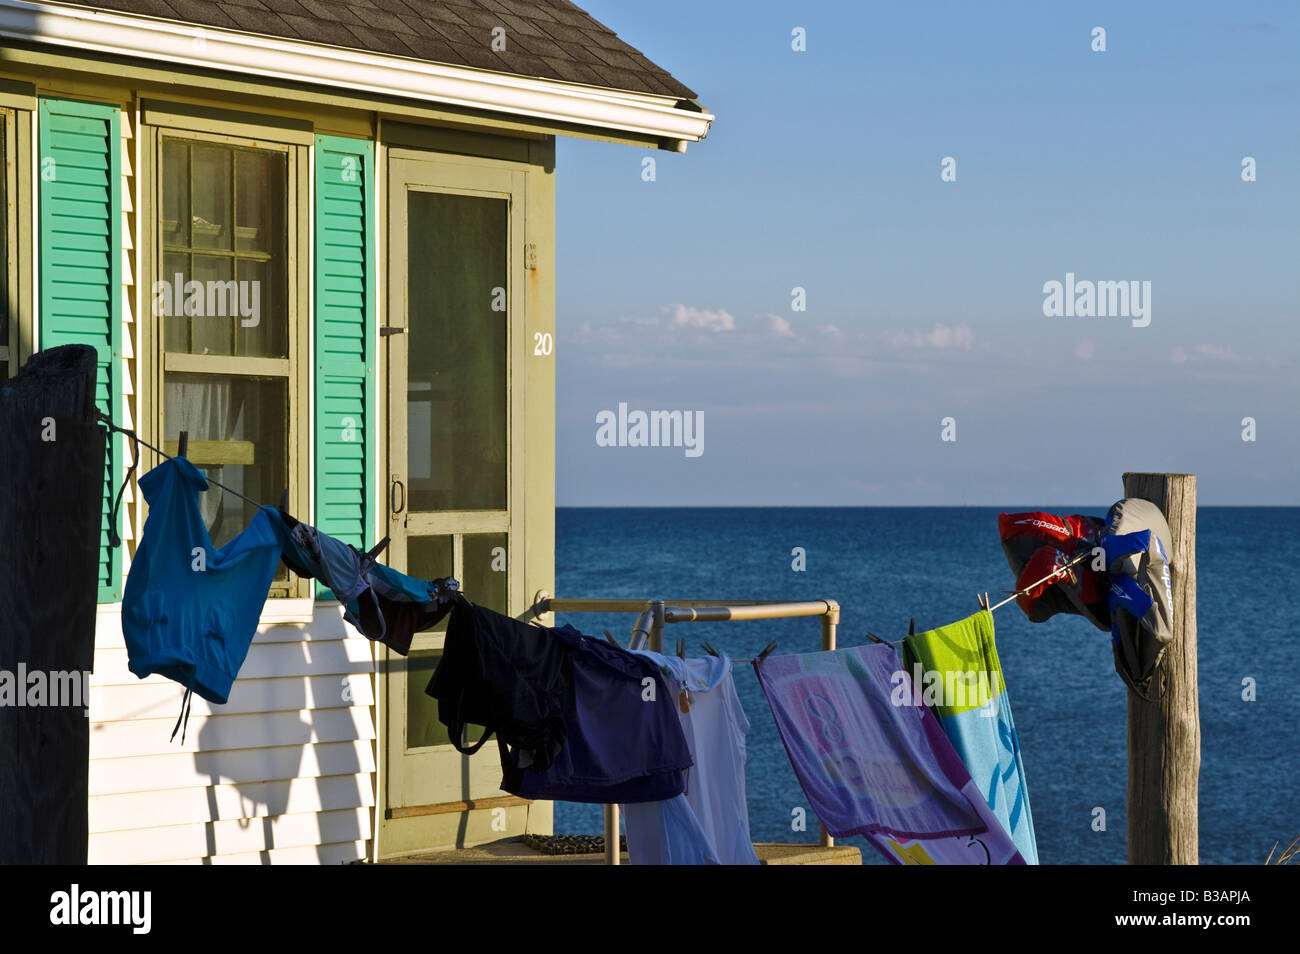 Waterfront beach cottage with clothes line, Truro, Cape Cod, MA Stock Photo